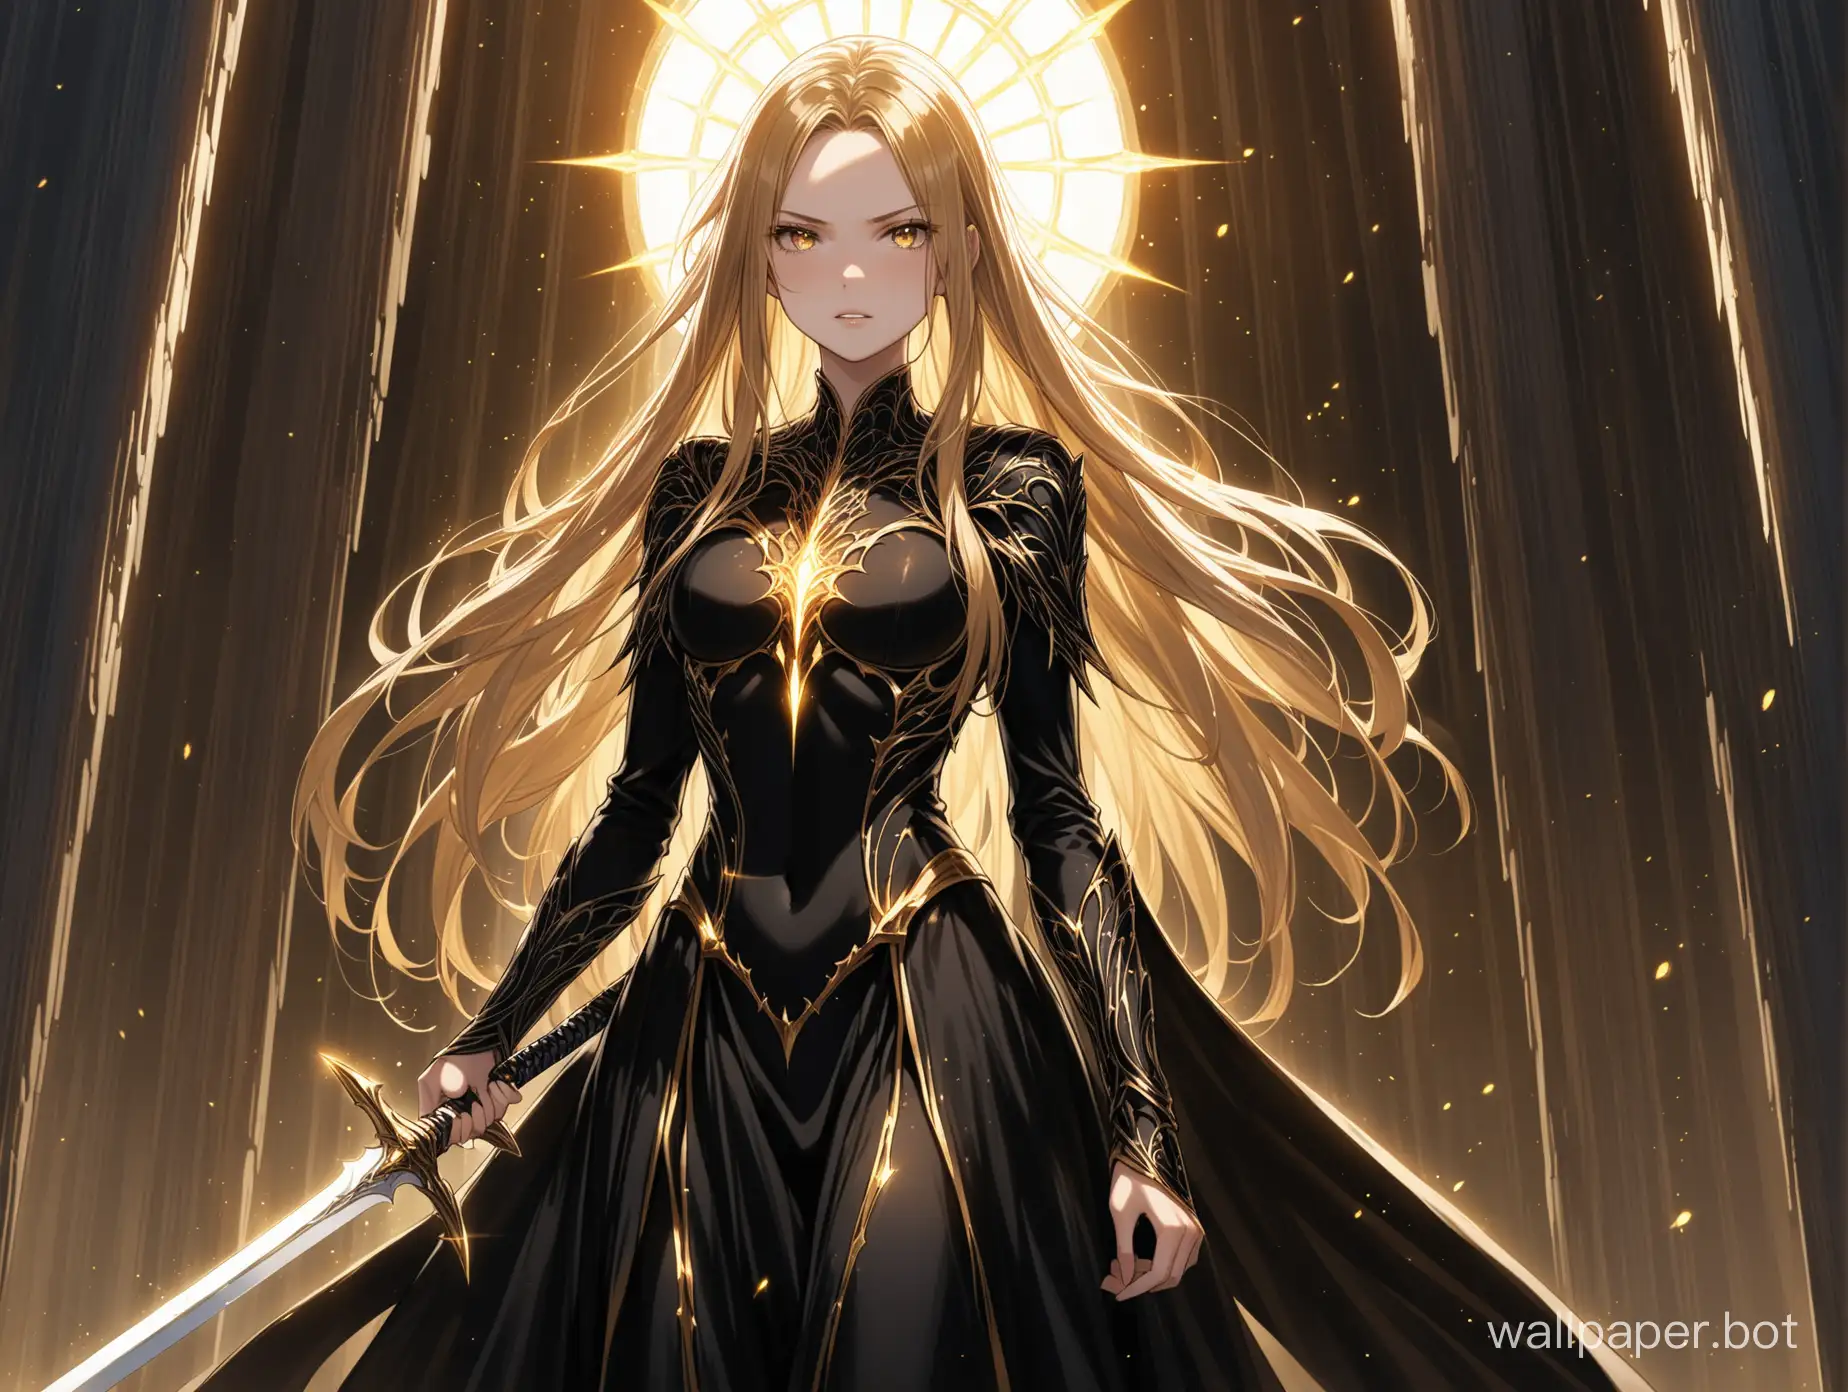 Mysterious-Woman-in-Elegant-Black-Dress-with-Glowing-Sword-by-Sunlit-House